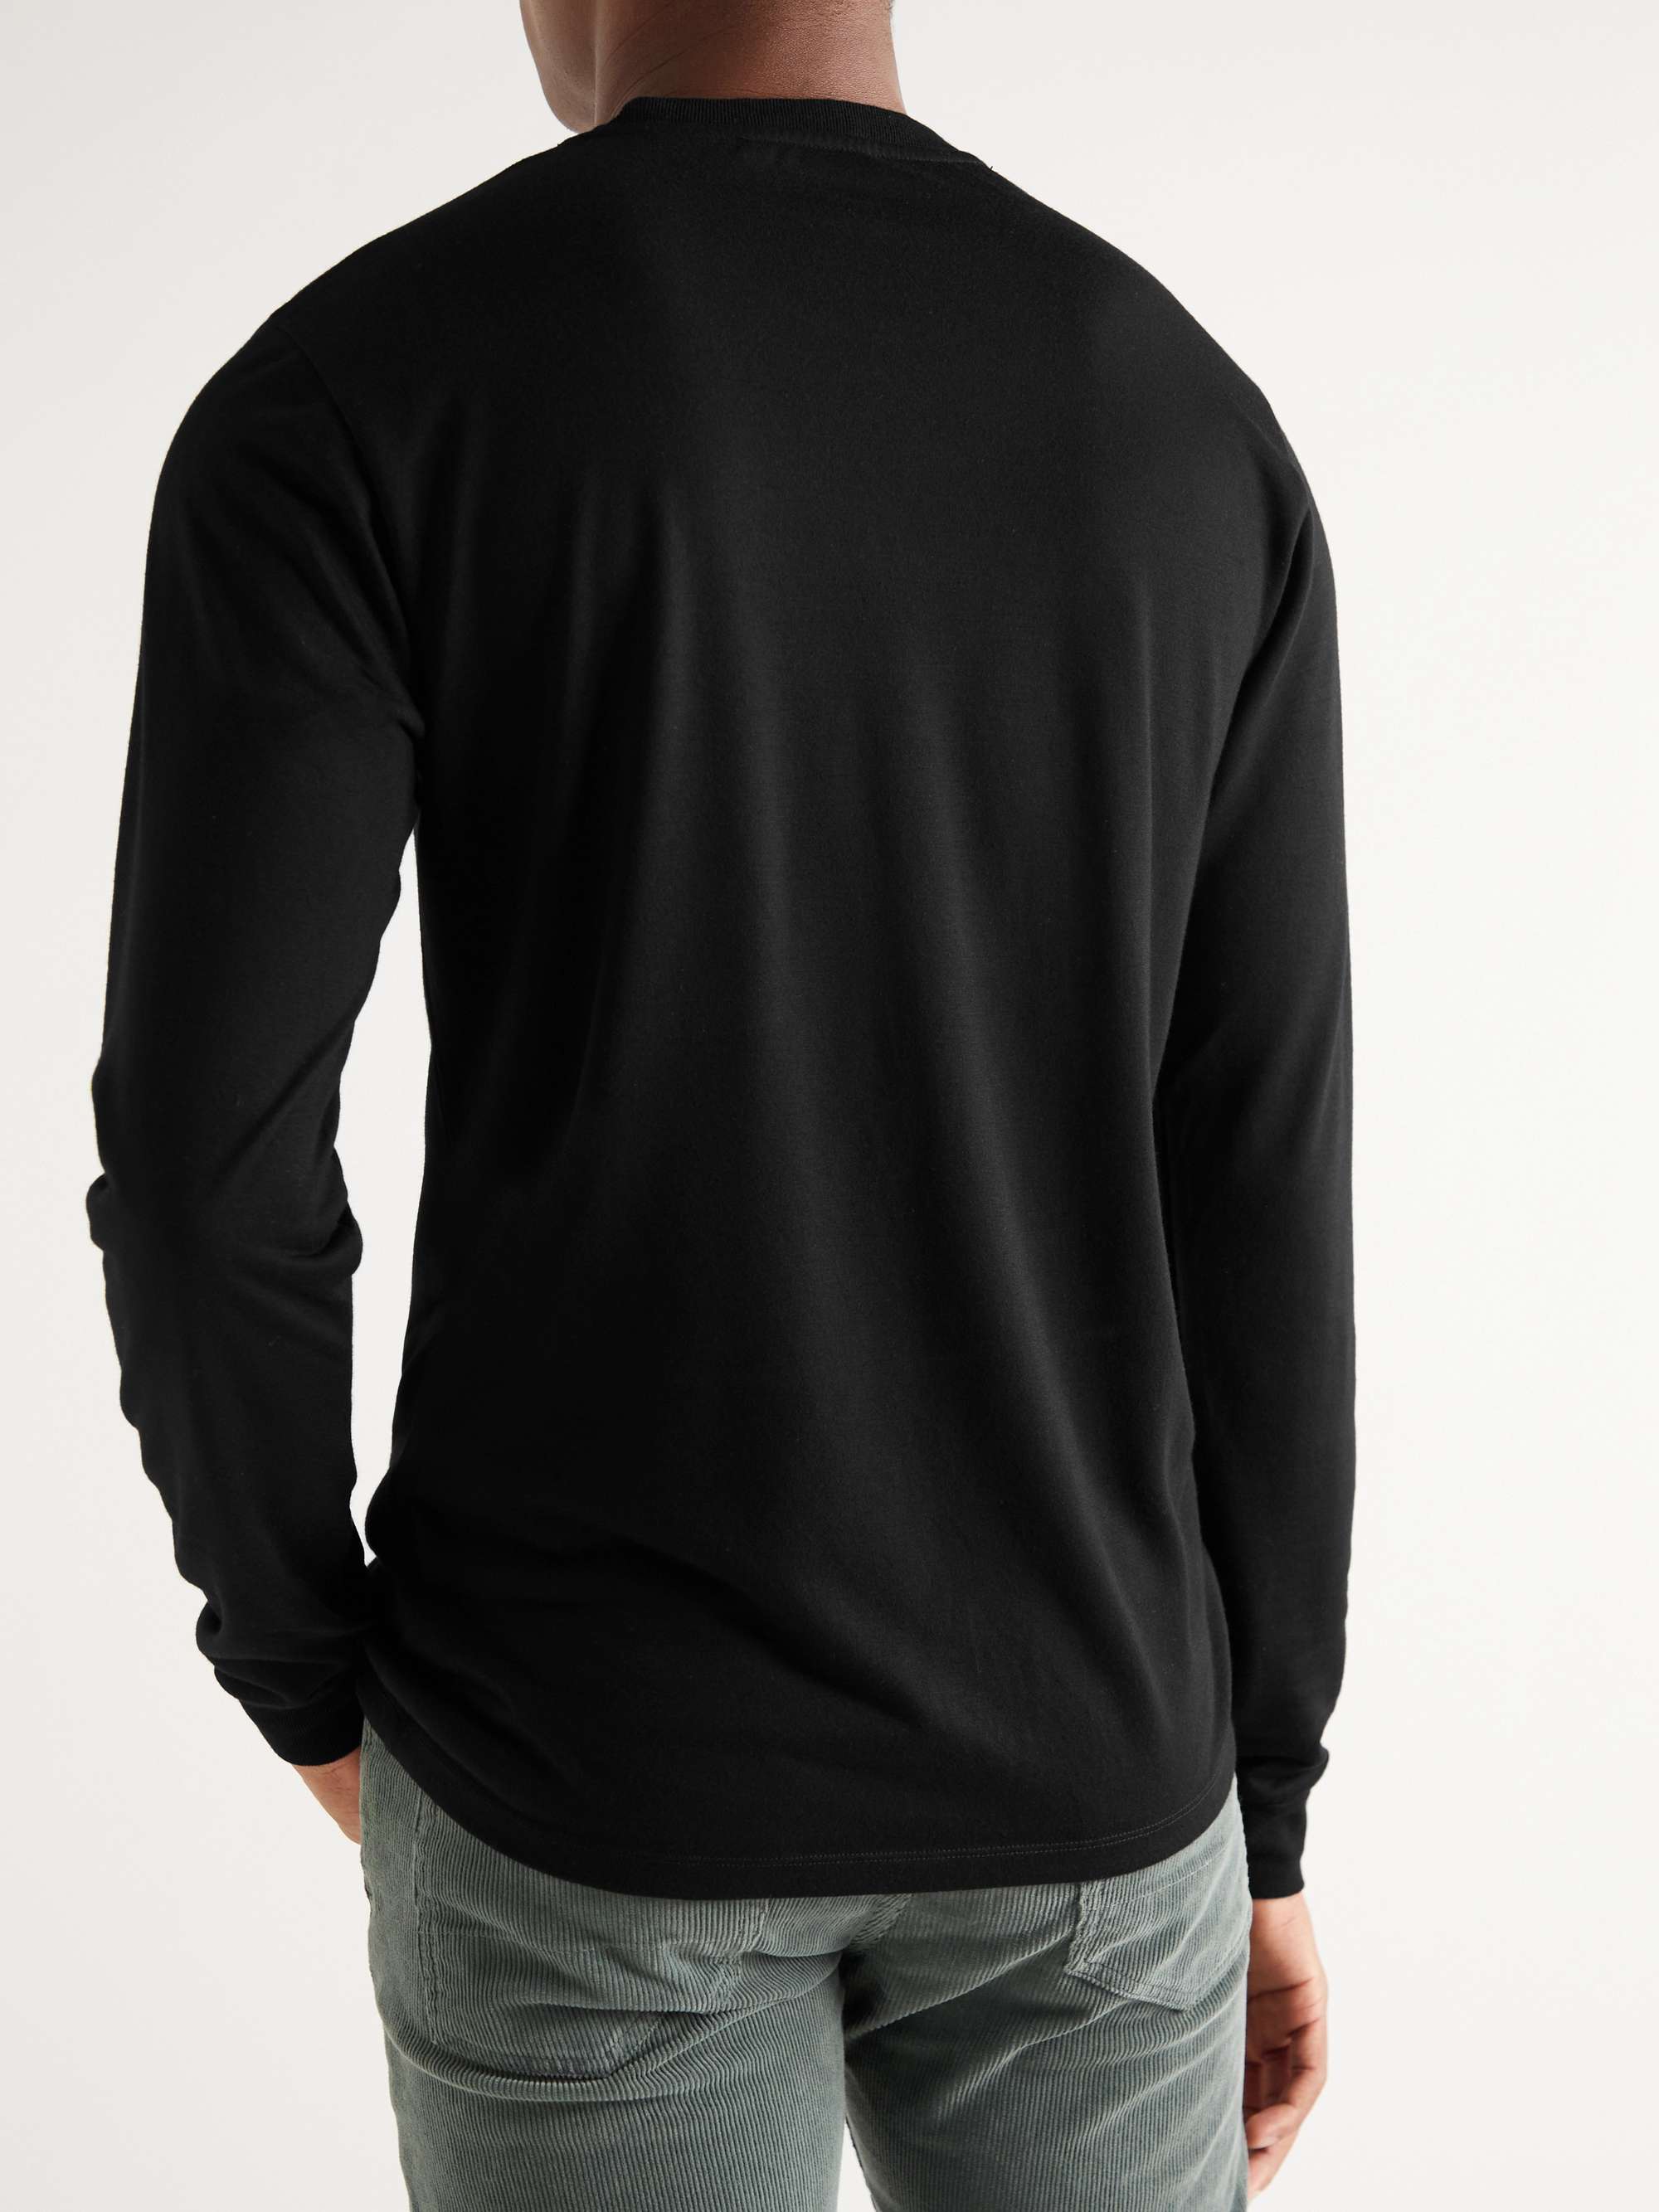 TOM FORD Slim-Fit Jersey T-Shirt